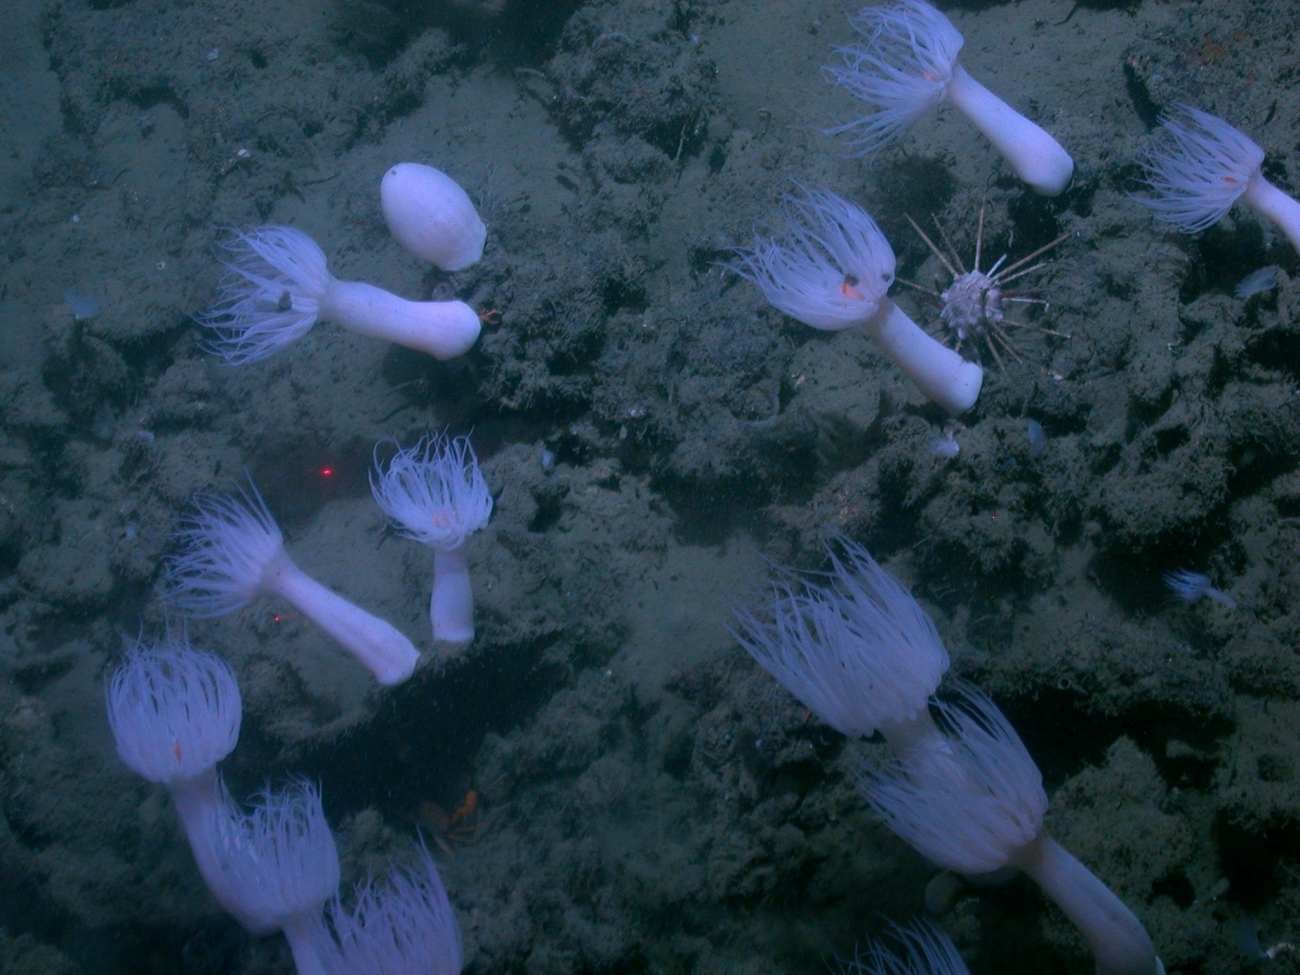 A number of large white anemones and a lone sea urchin